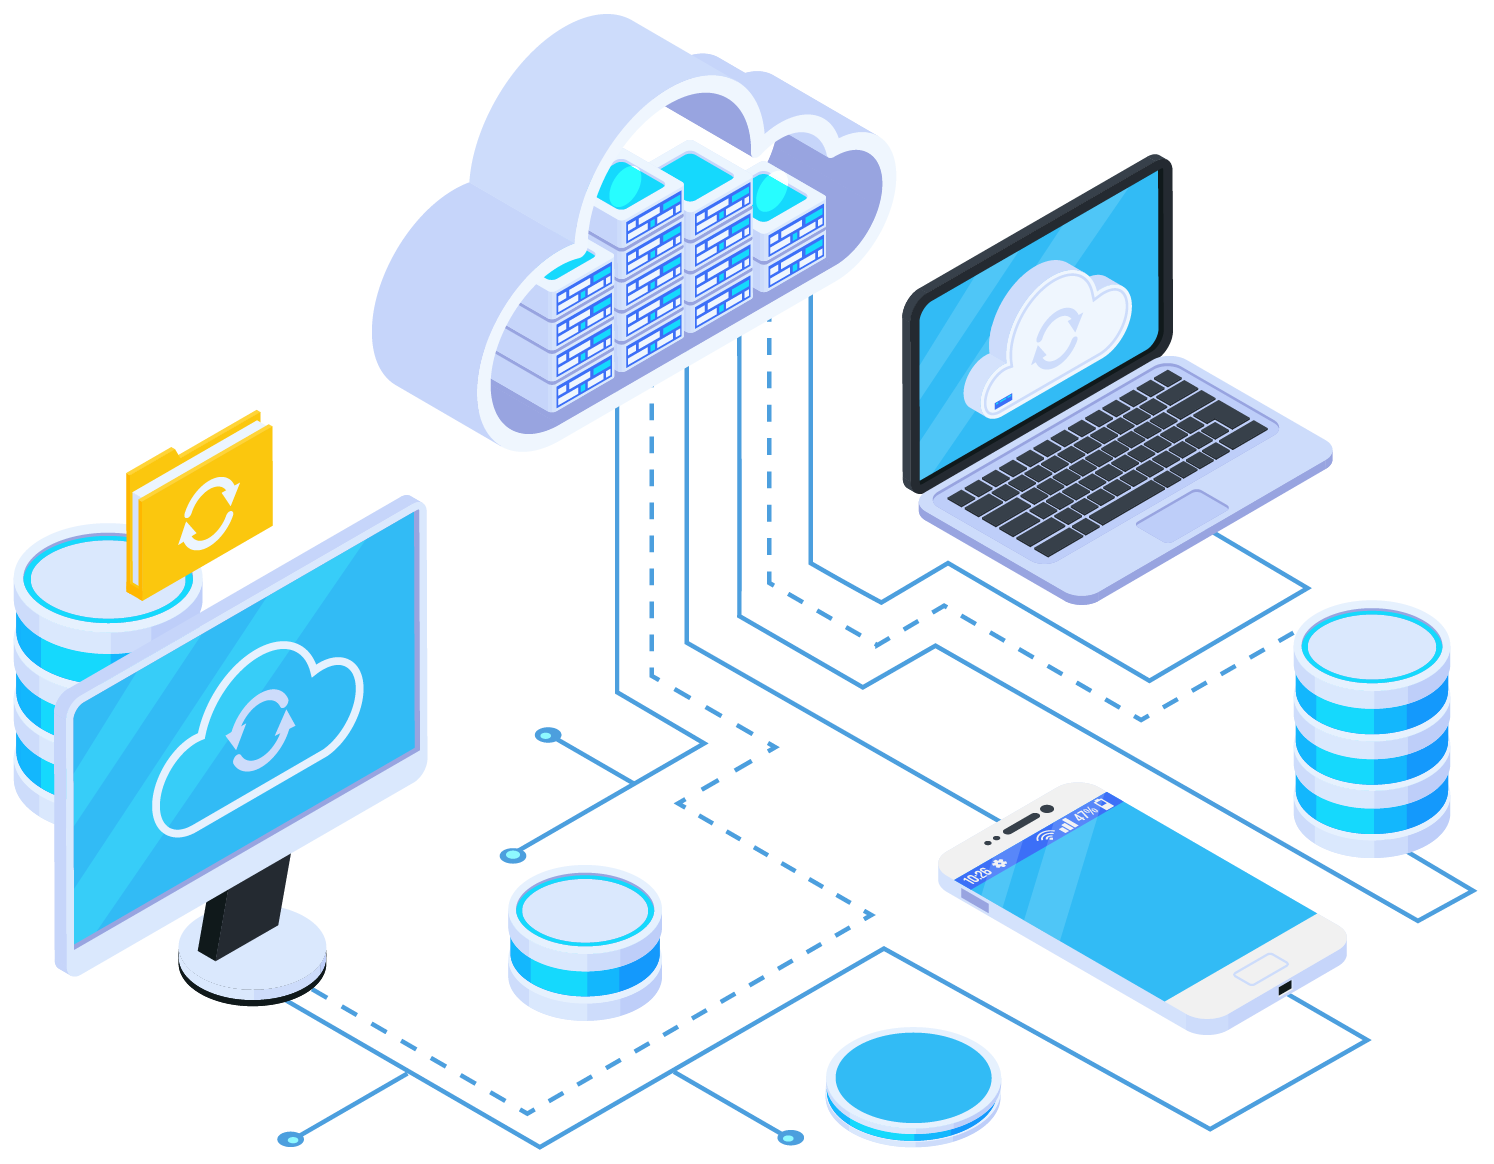 Operating Storage and backup devices interconnected 